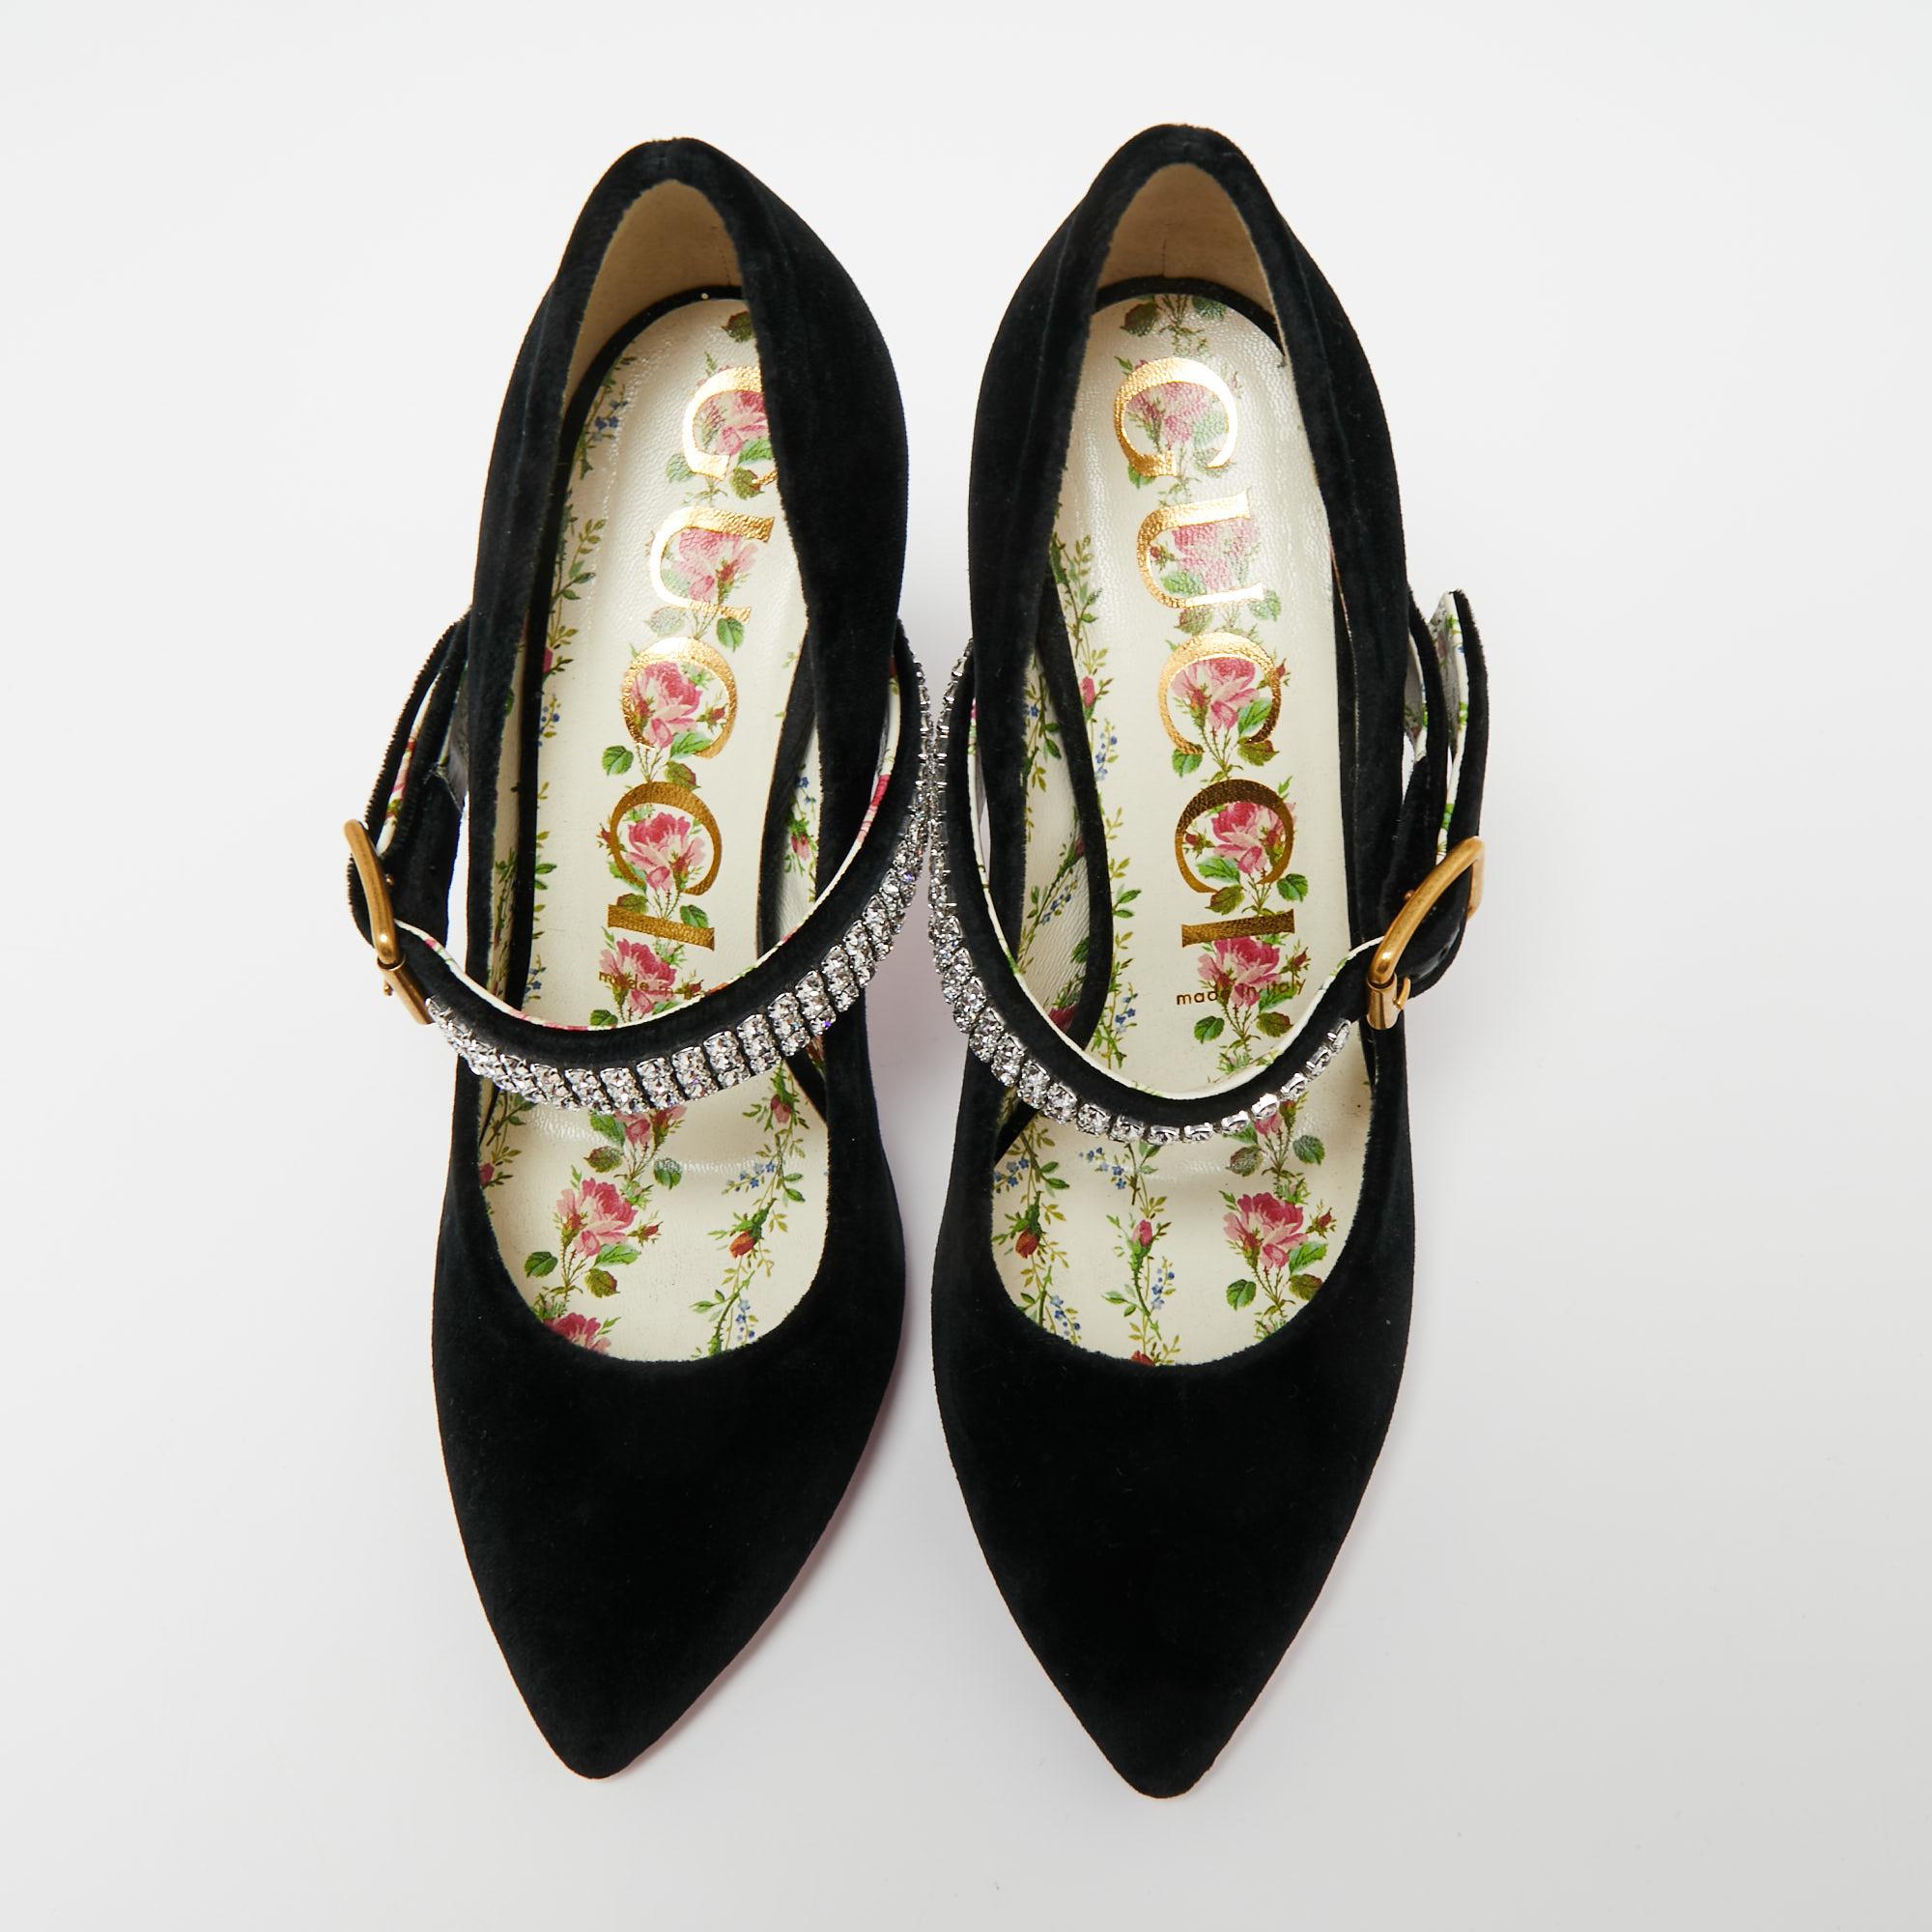 Inspired by the vintage Mary Jane style, these gorgeous pumps from the House of Gucci are going to be your favorite. They are designed luxuriously using black velvet into a sleek silhouette. They exhibit a crystal-embellished strap, gold-tone